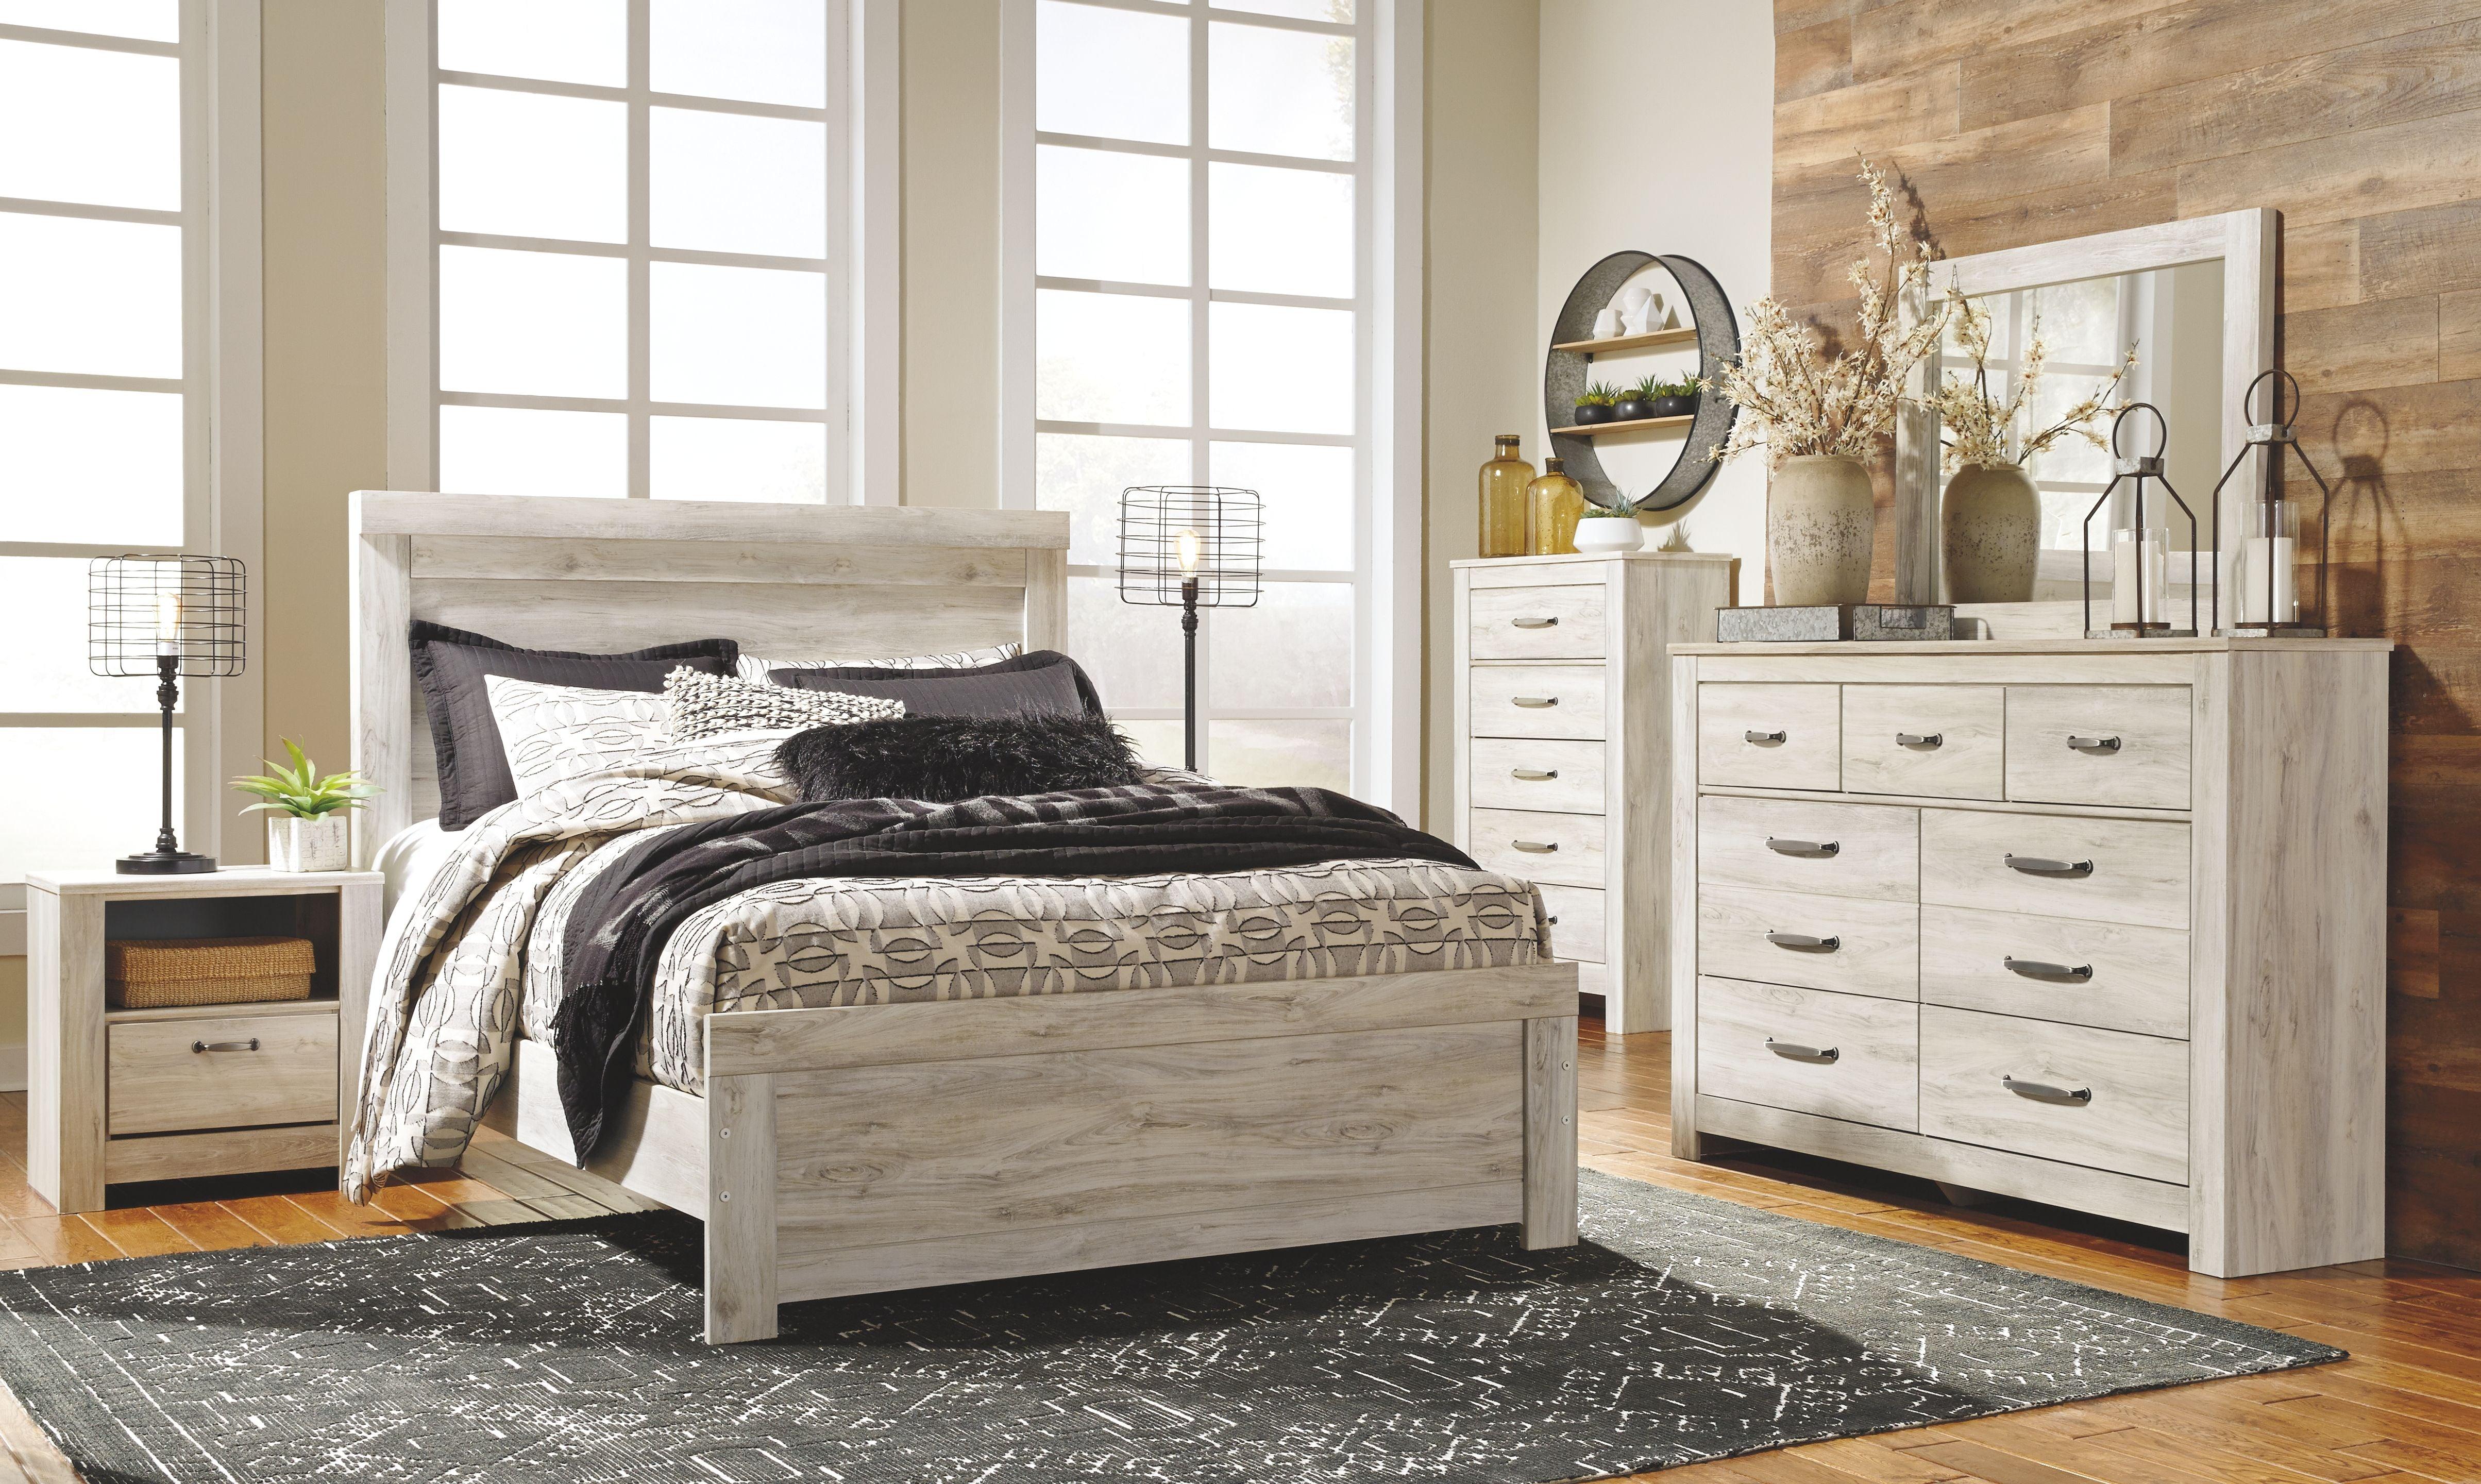 Signature Design by Ashley® - Bellaby - Dresser, Mirror, Panel Bed Set - 5th Avenue Furniture